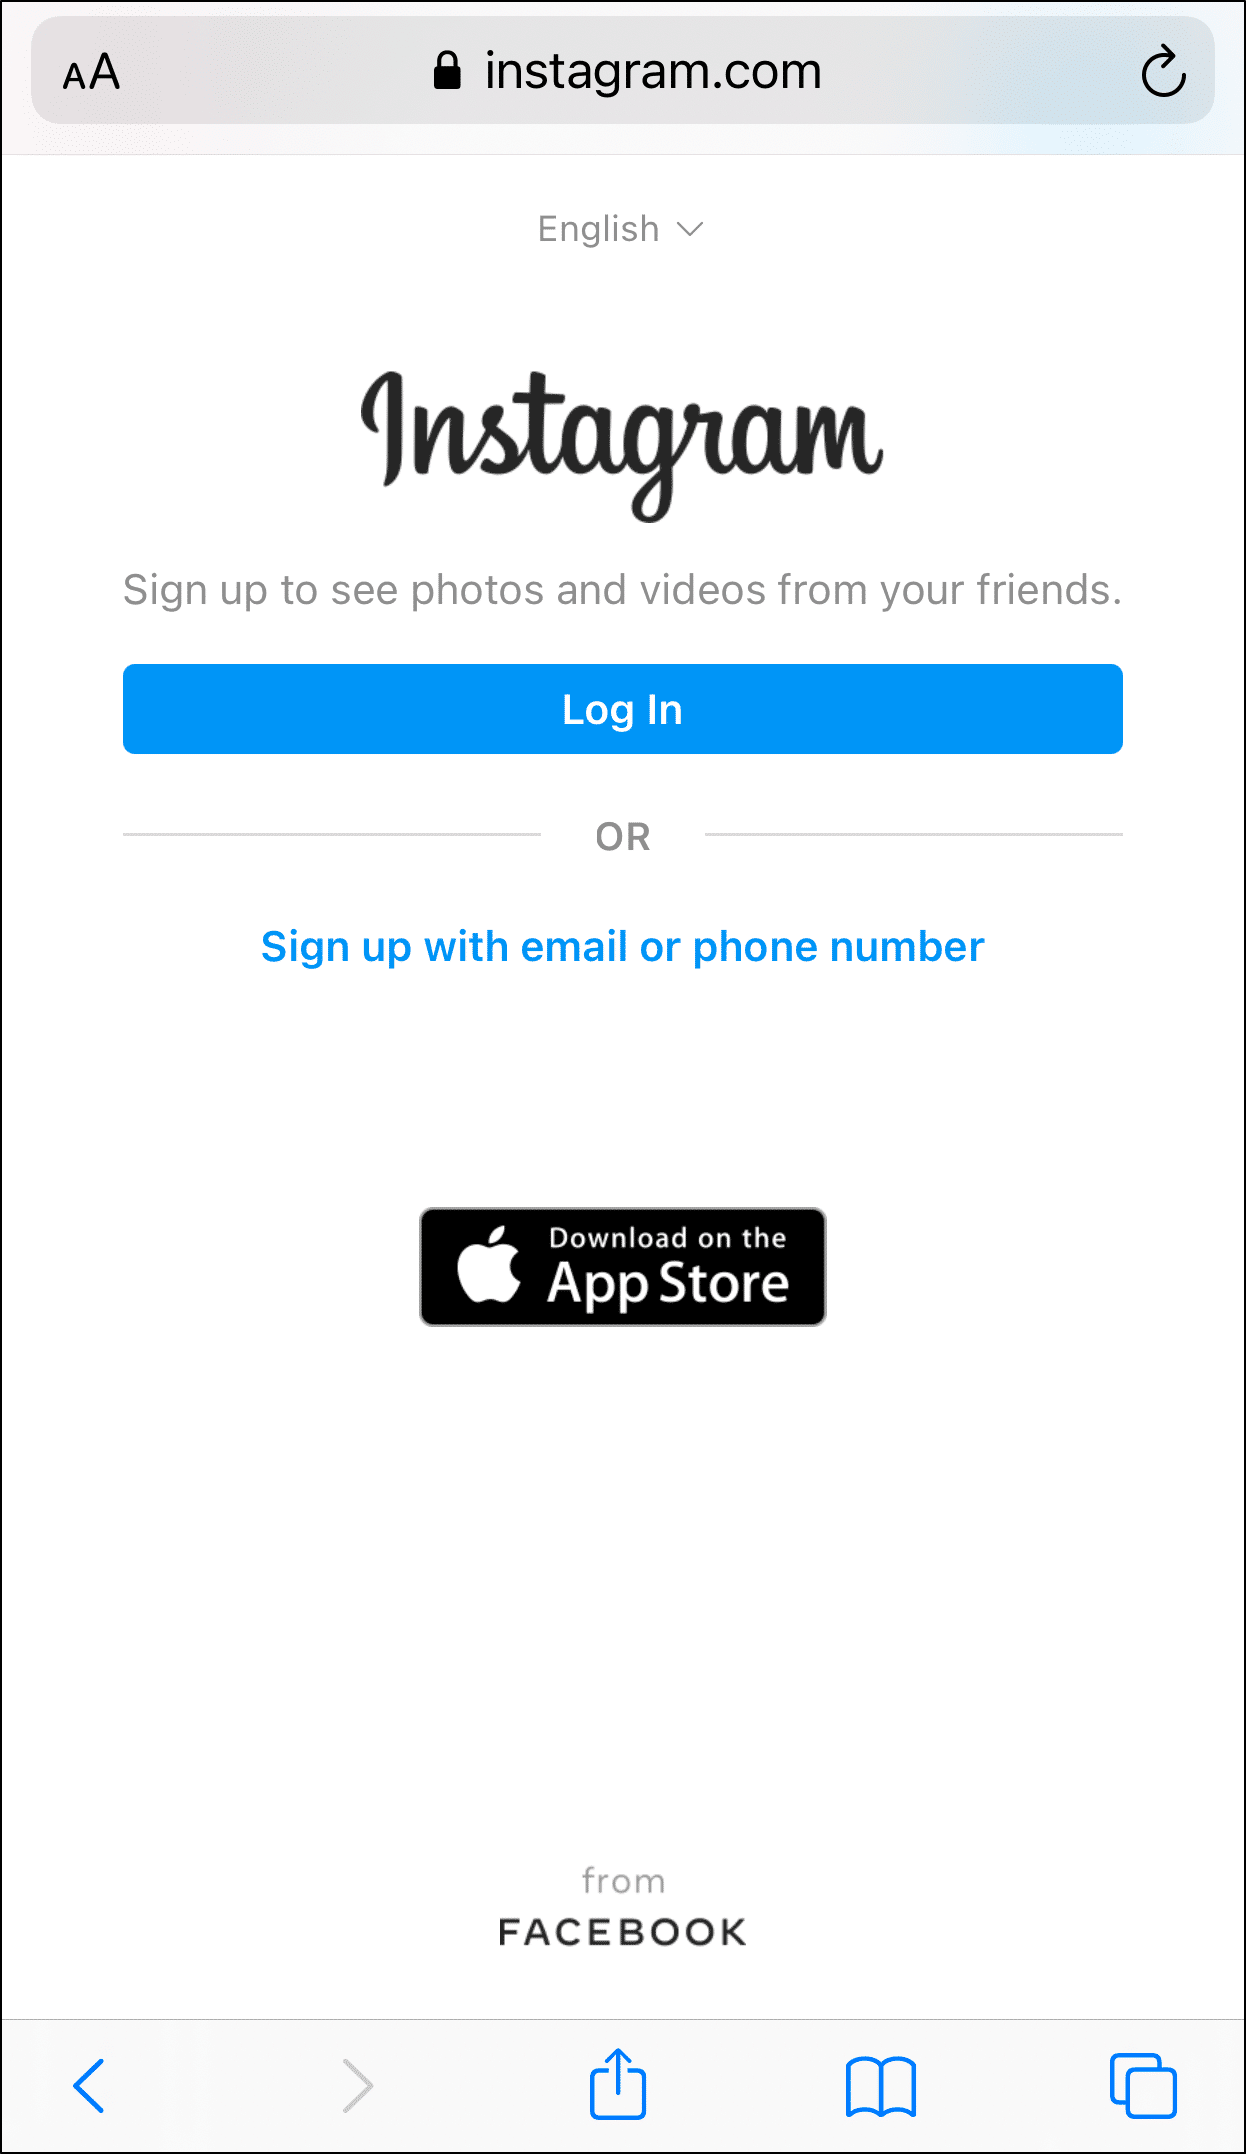 use Instagram through your web browser app if you can't sign in or log in